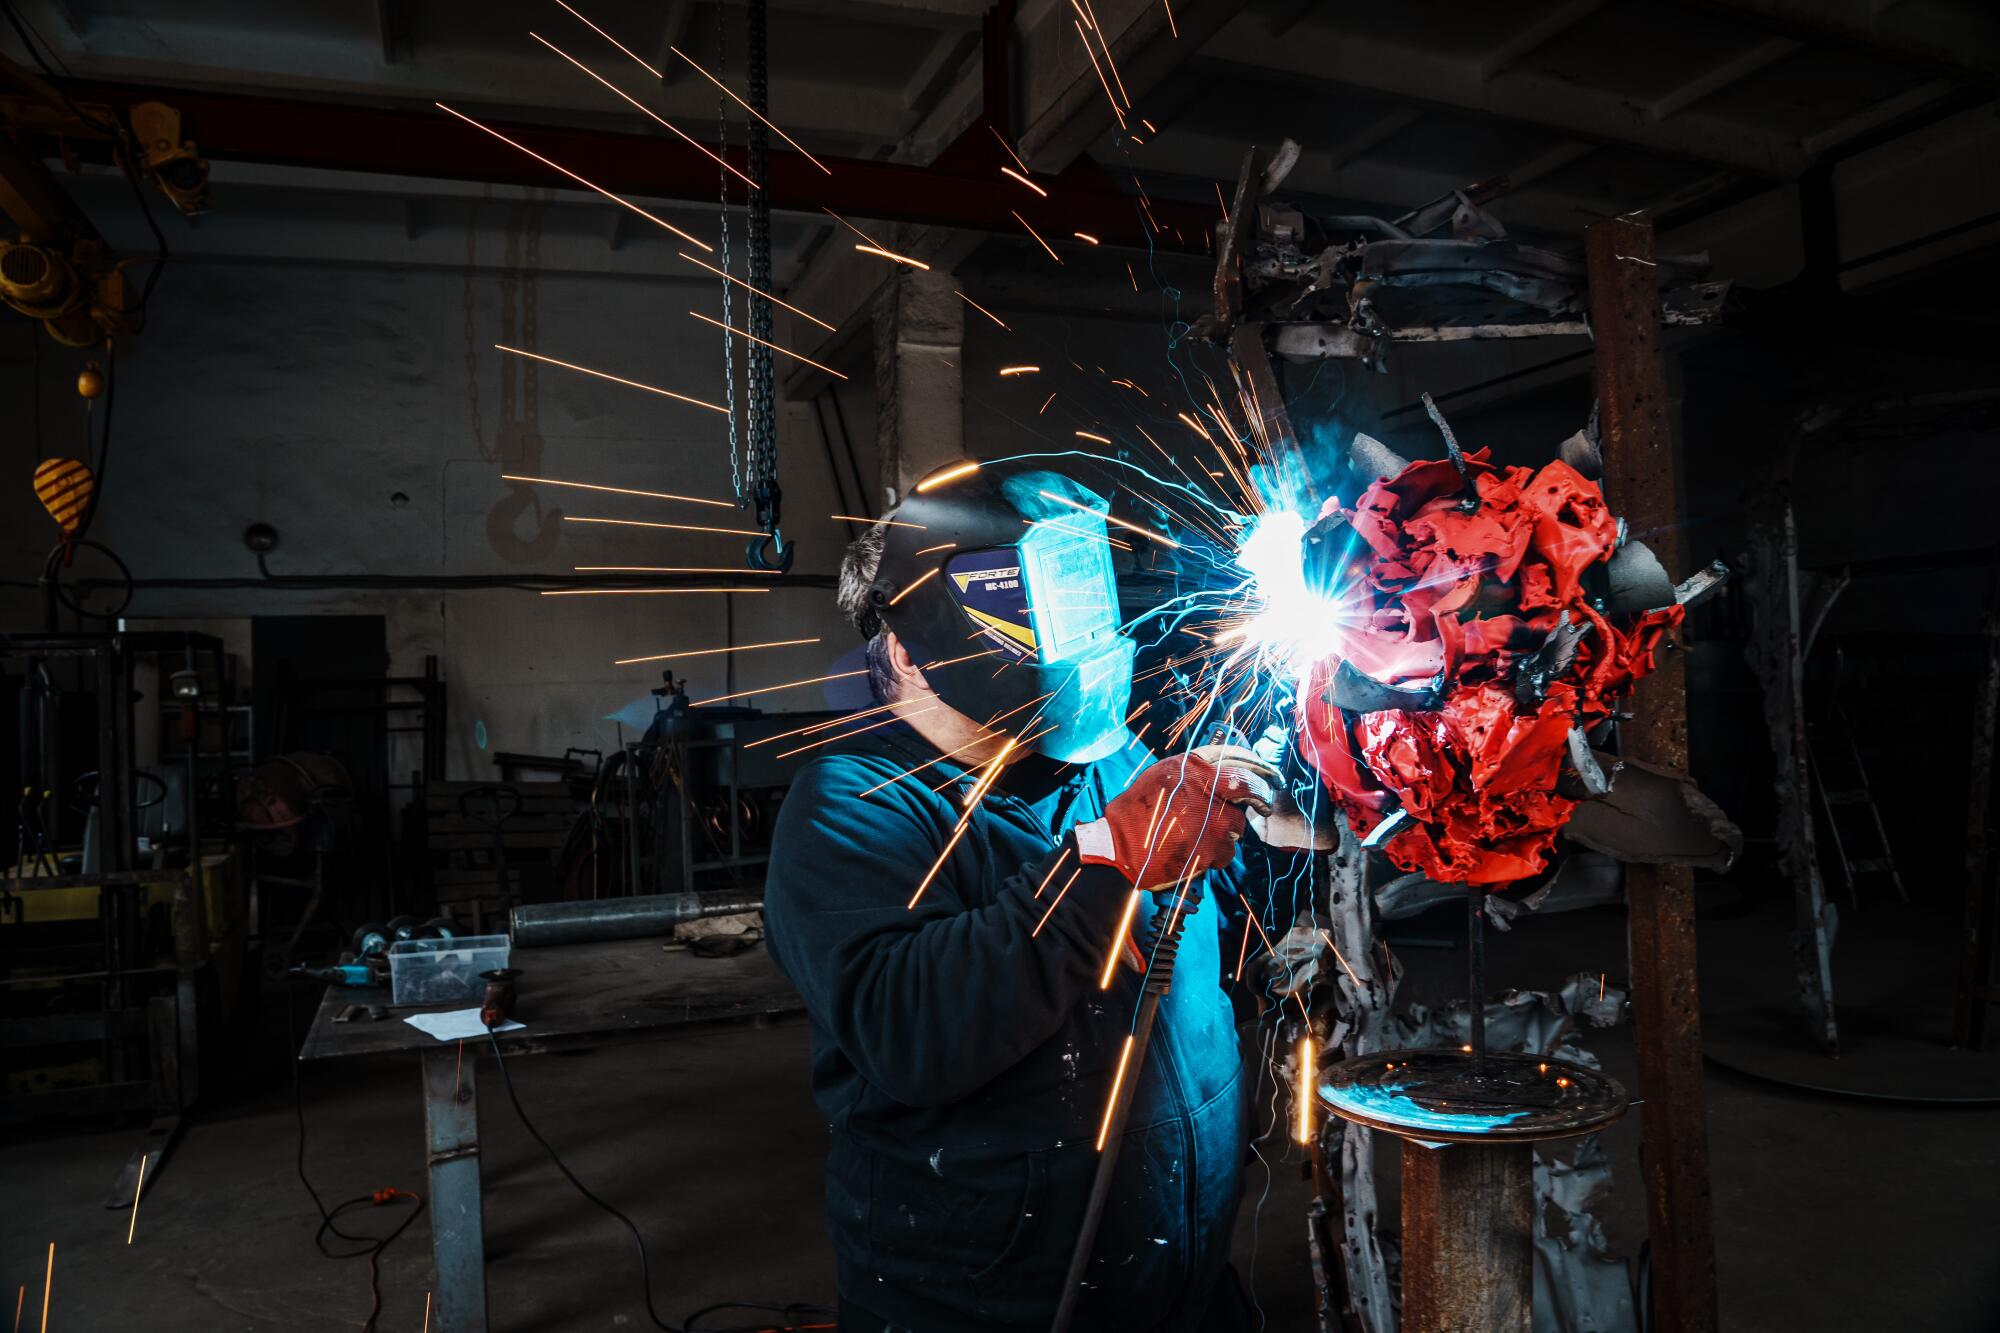 Sparks fly as Reva, in a welding mask, melds and transforms war debris into artworks.